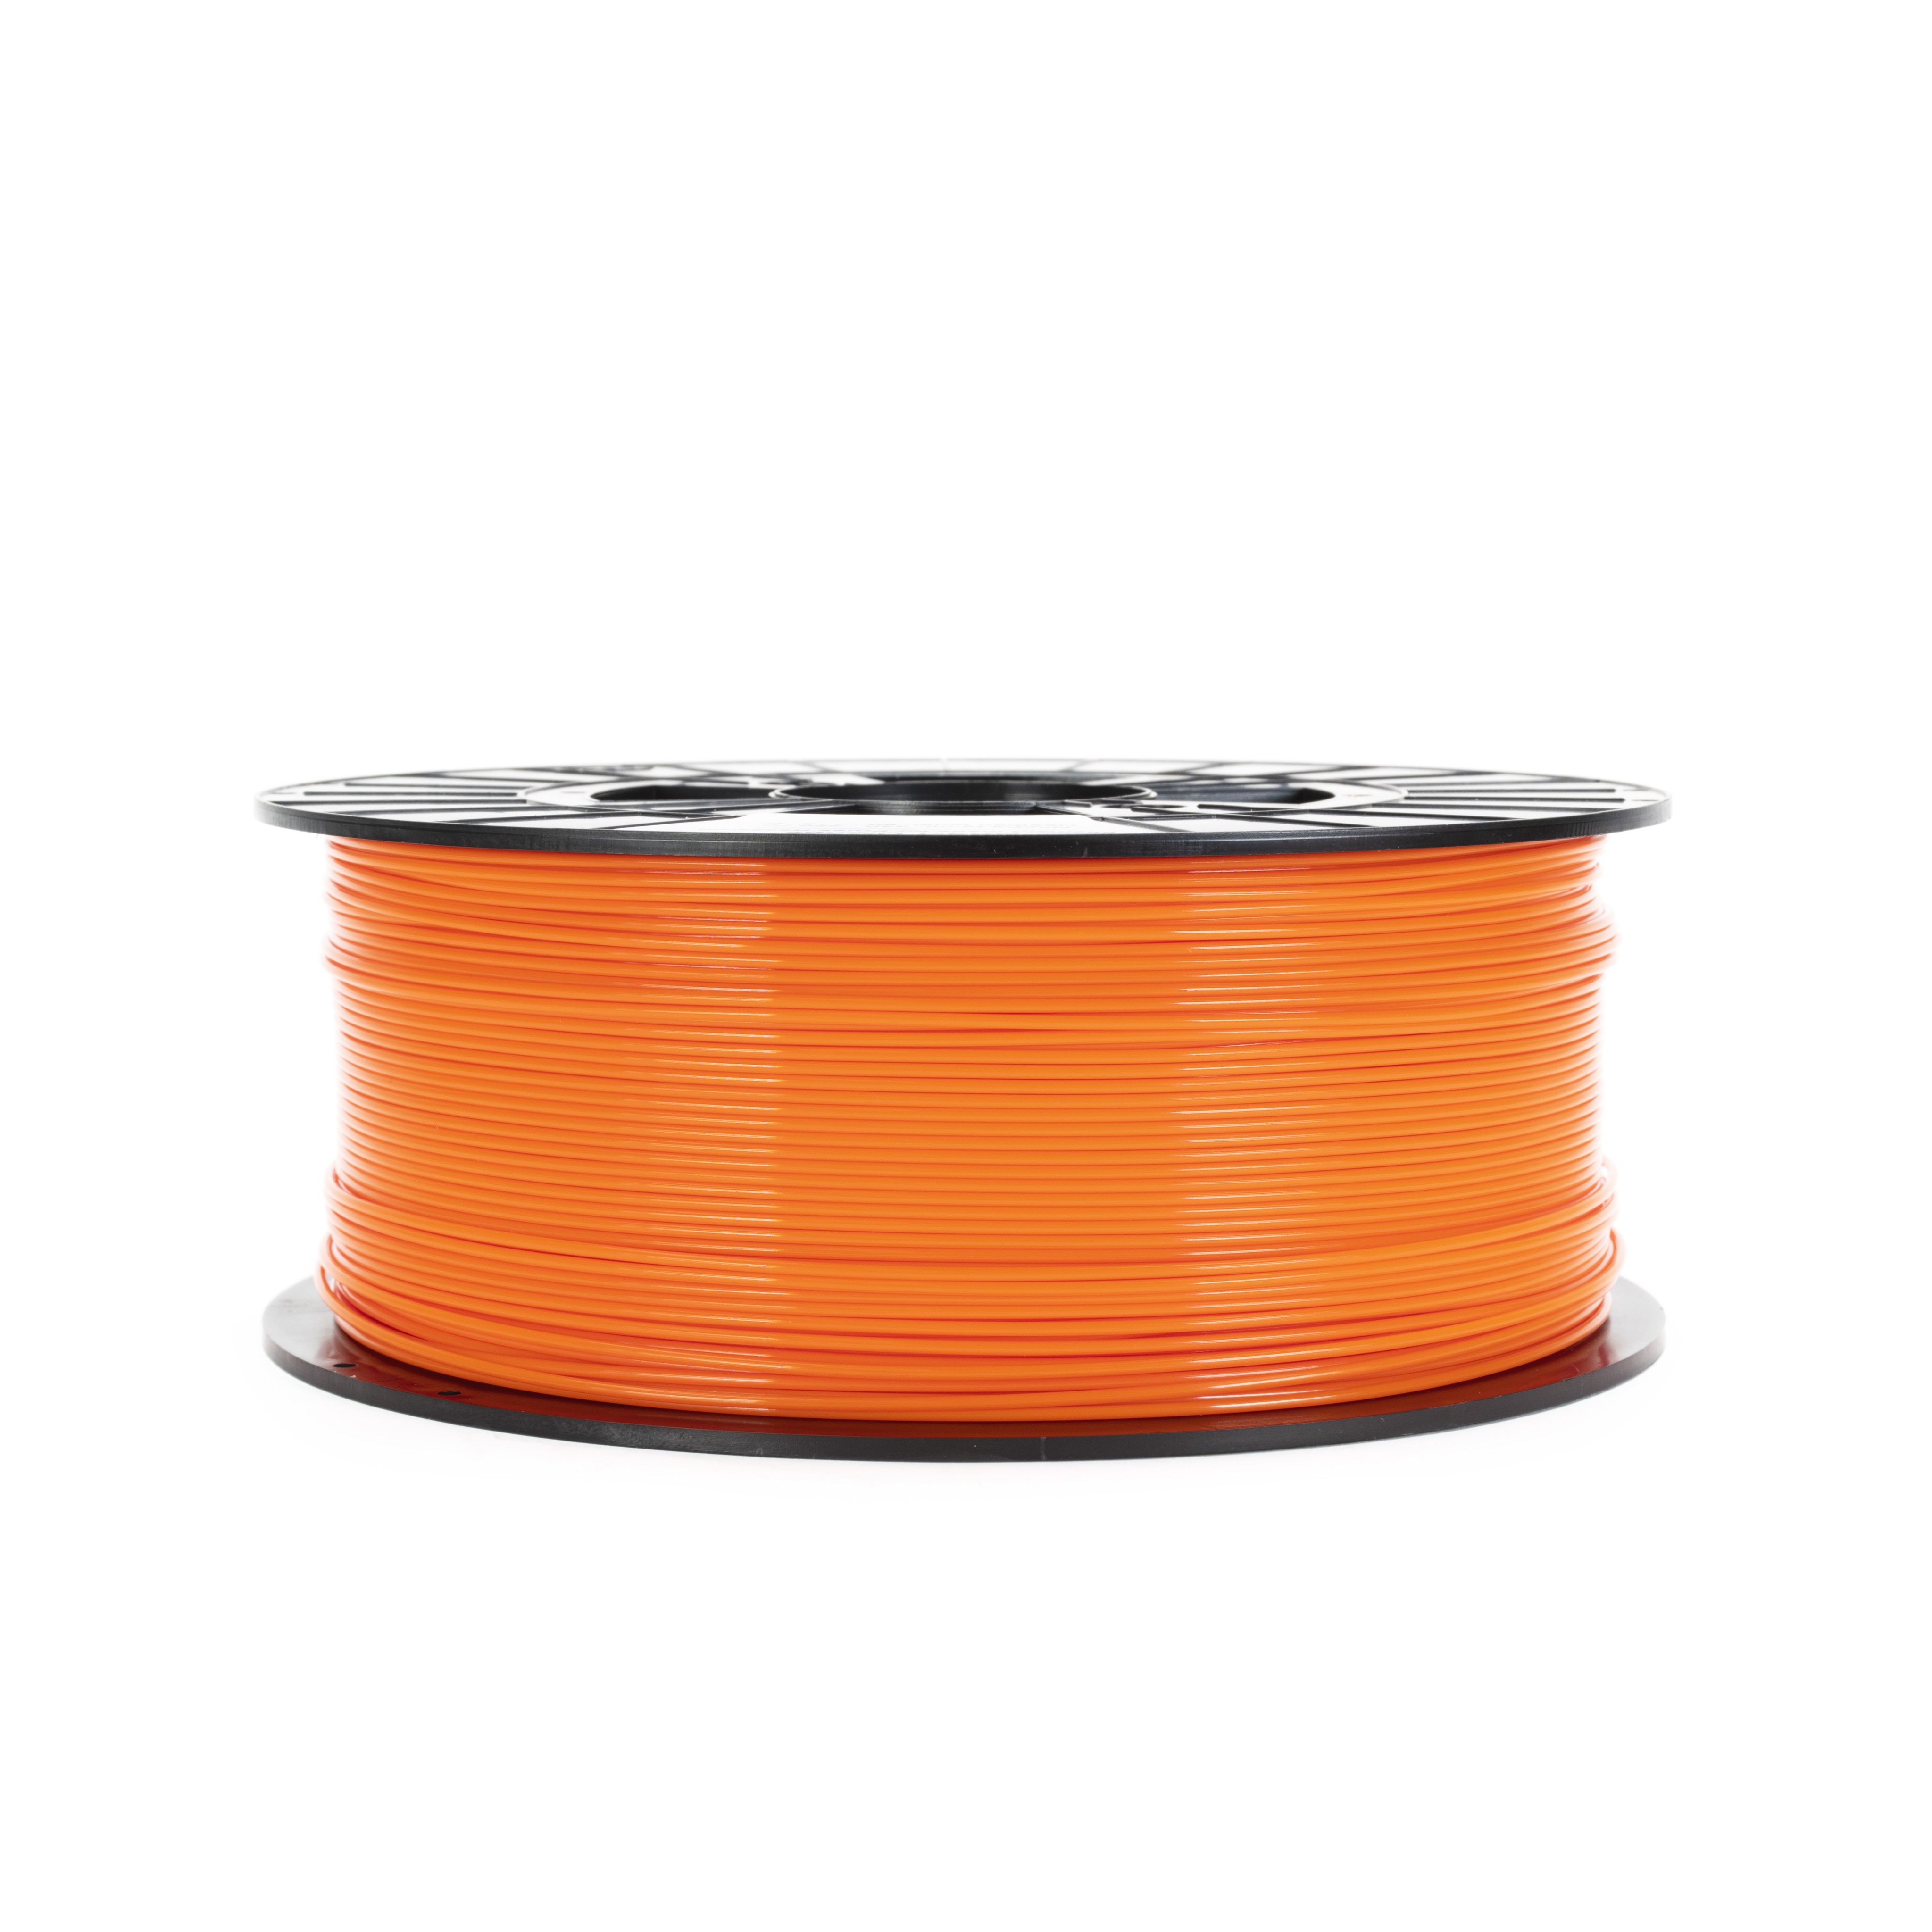 Prusa Research ABS Easy Ø1.75 1 kg Stampa 3D Arancione FLM-EBS-175-ORG 